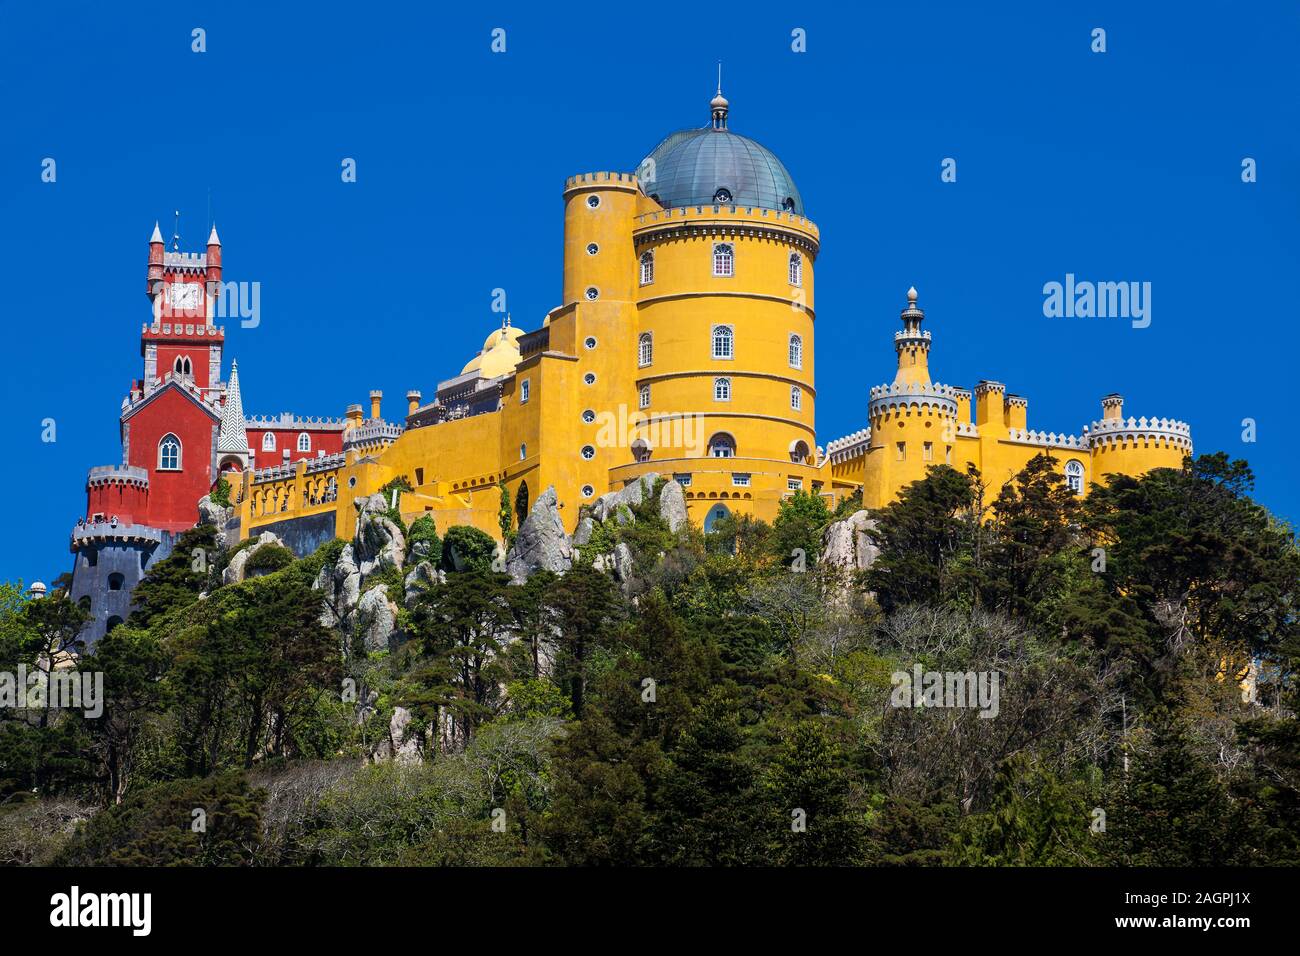 Pena palace gardens stock photography and images Alamy